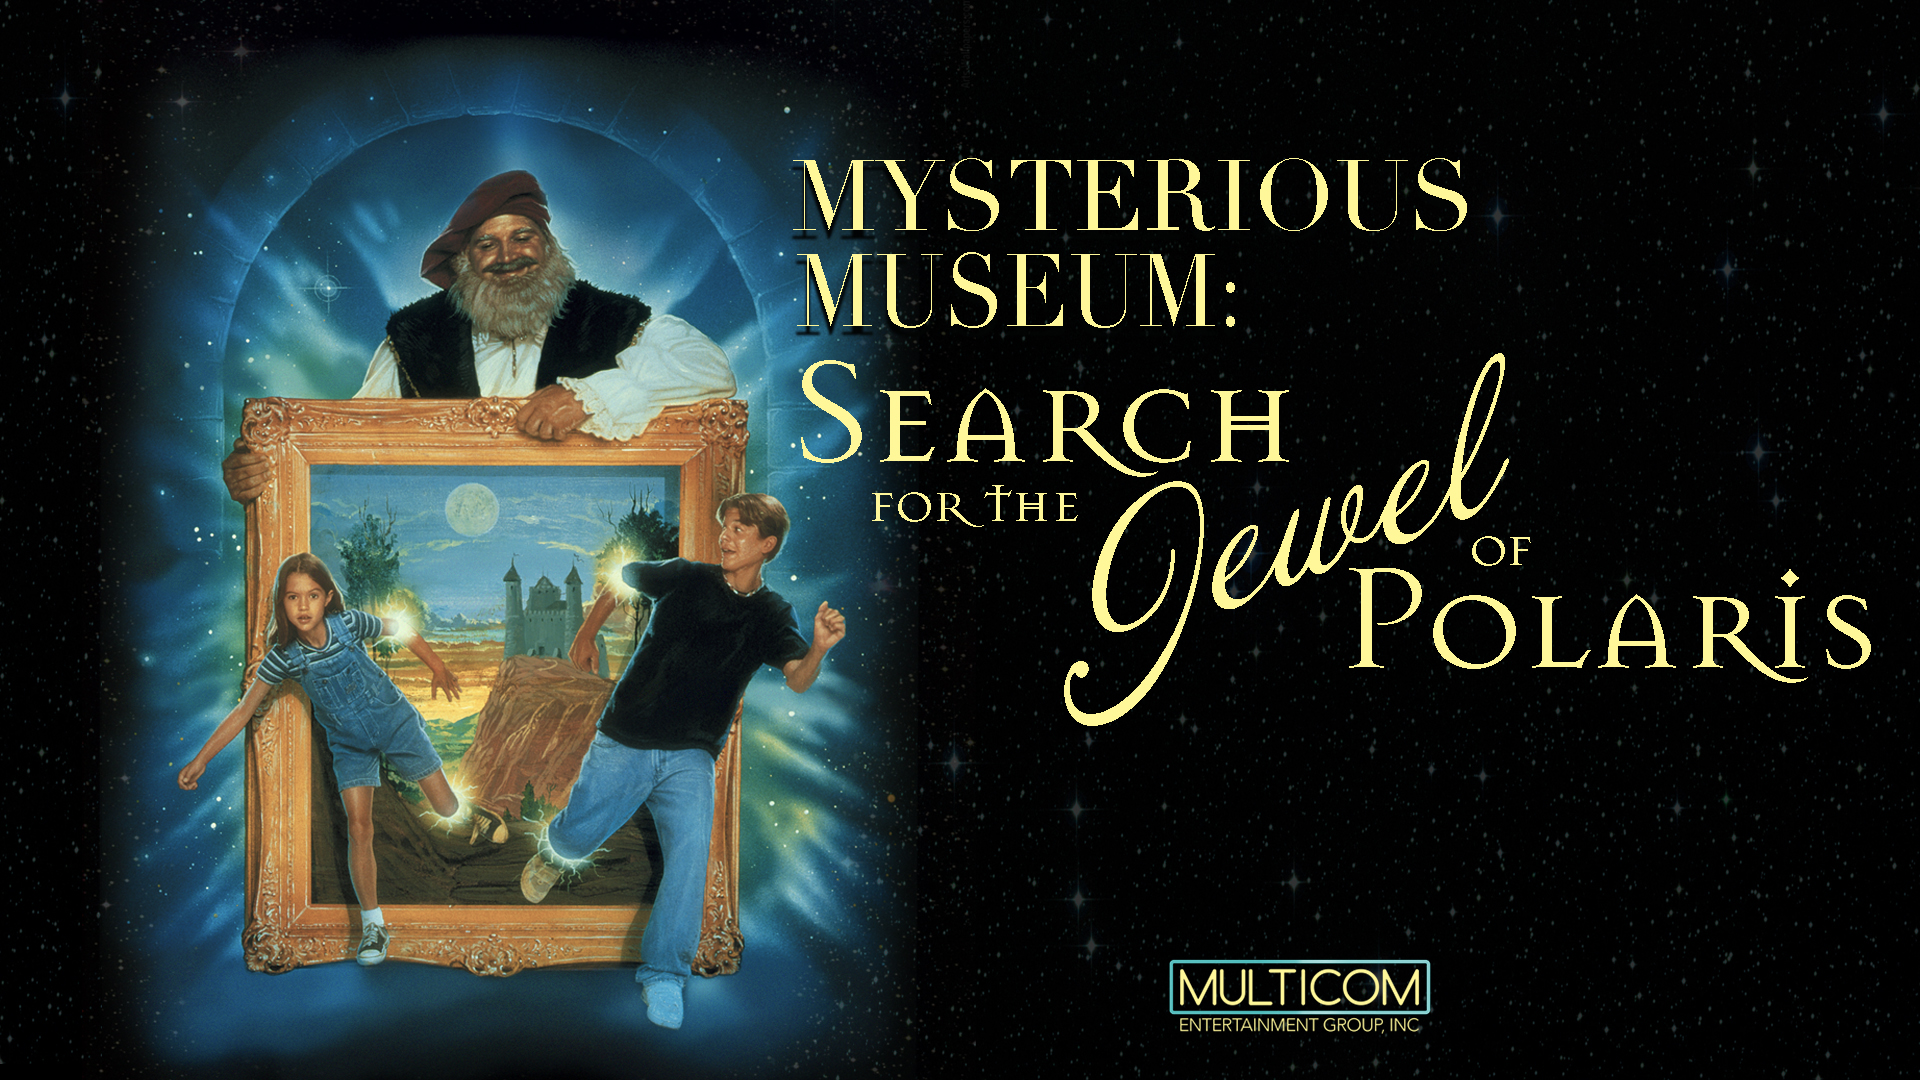 Search for the Jewel of Polaris: Mysterious Museum